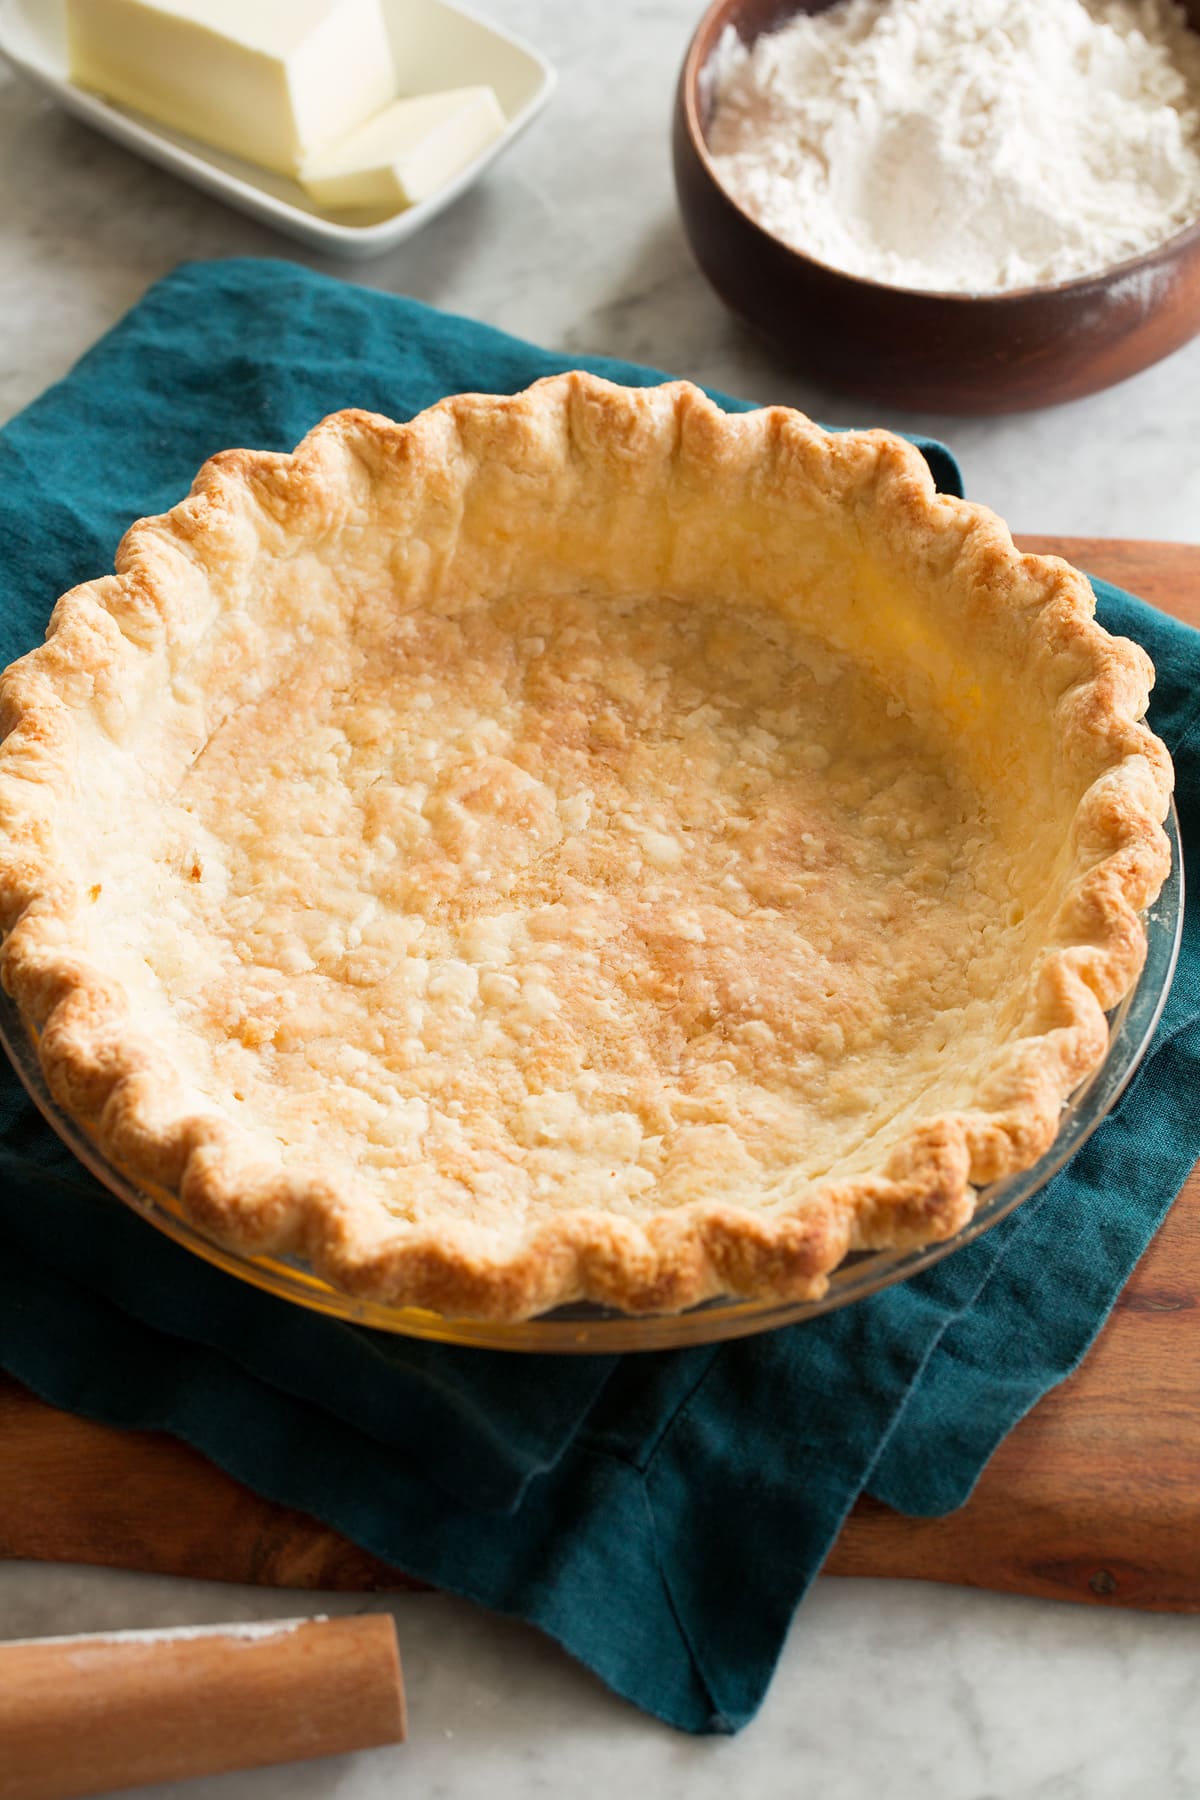 A baked unfilled pie crust.